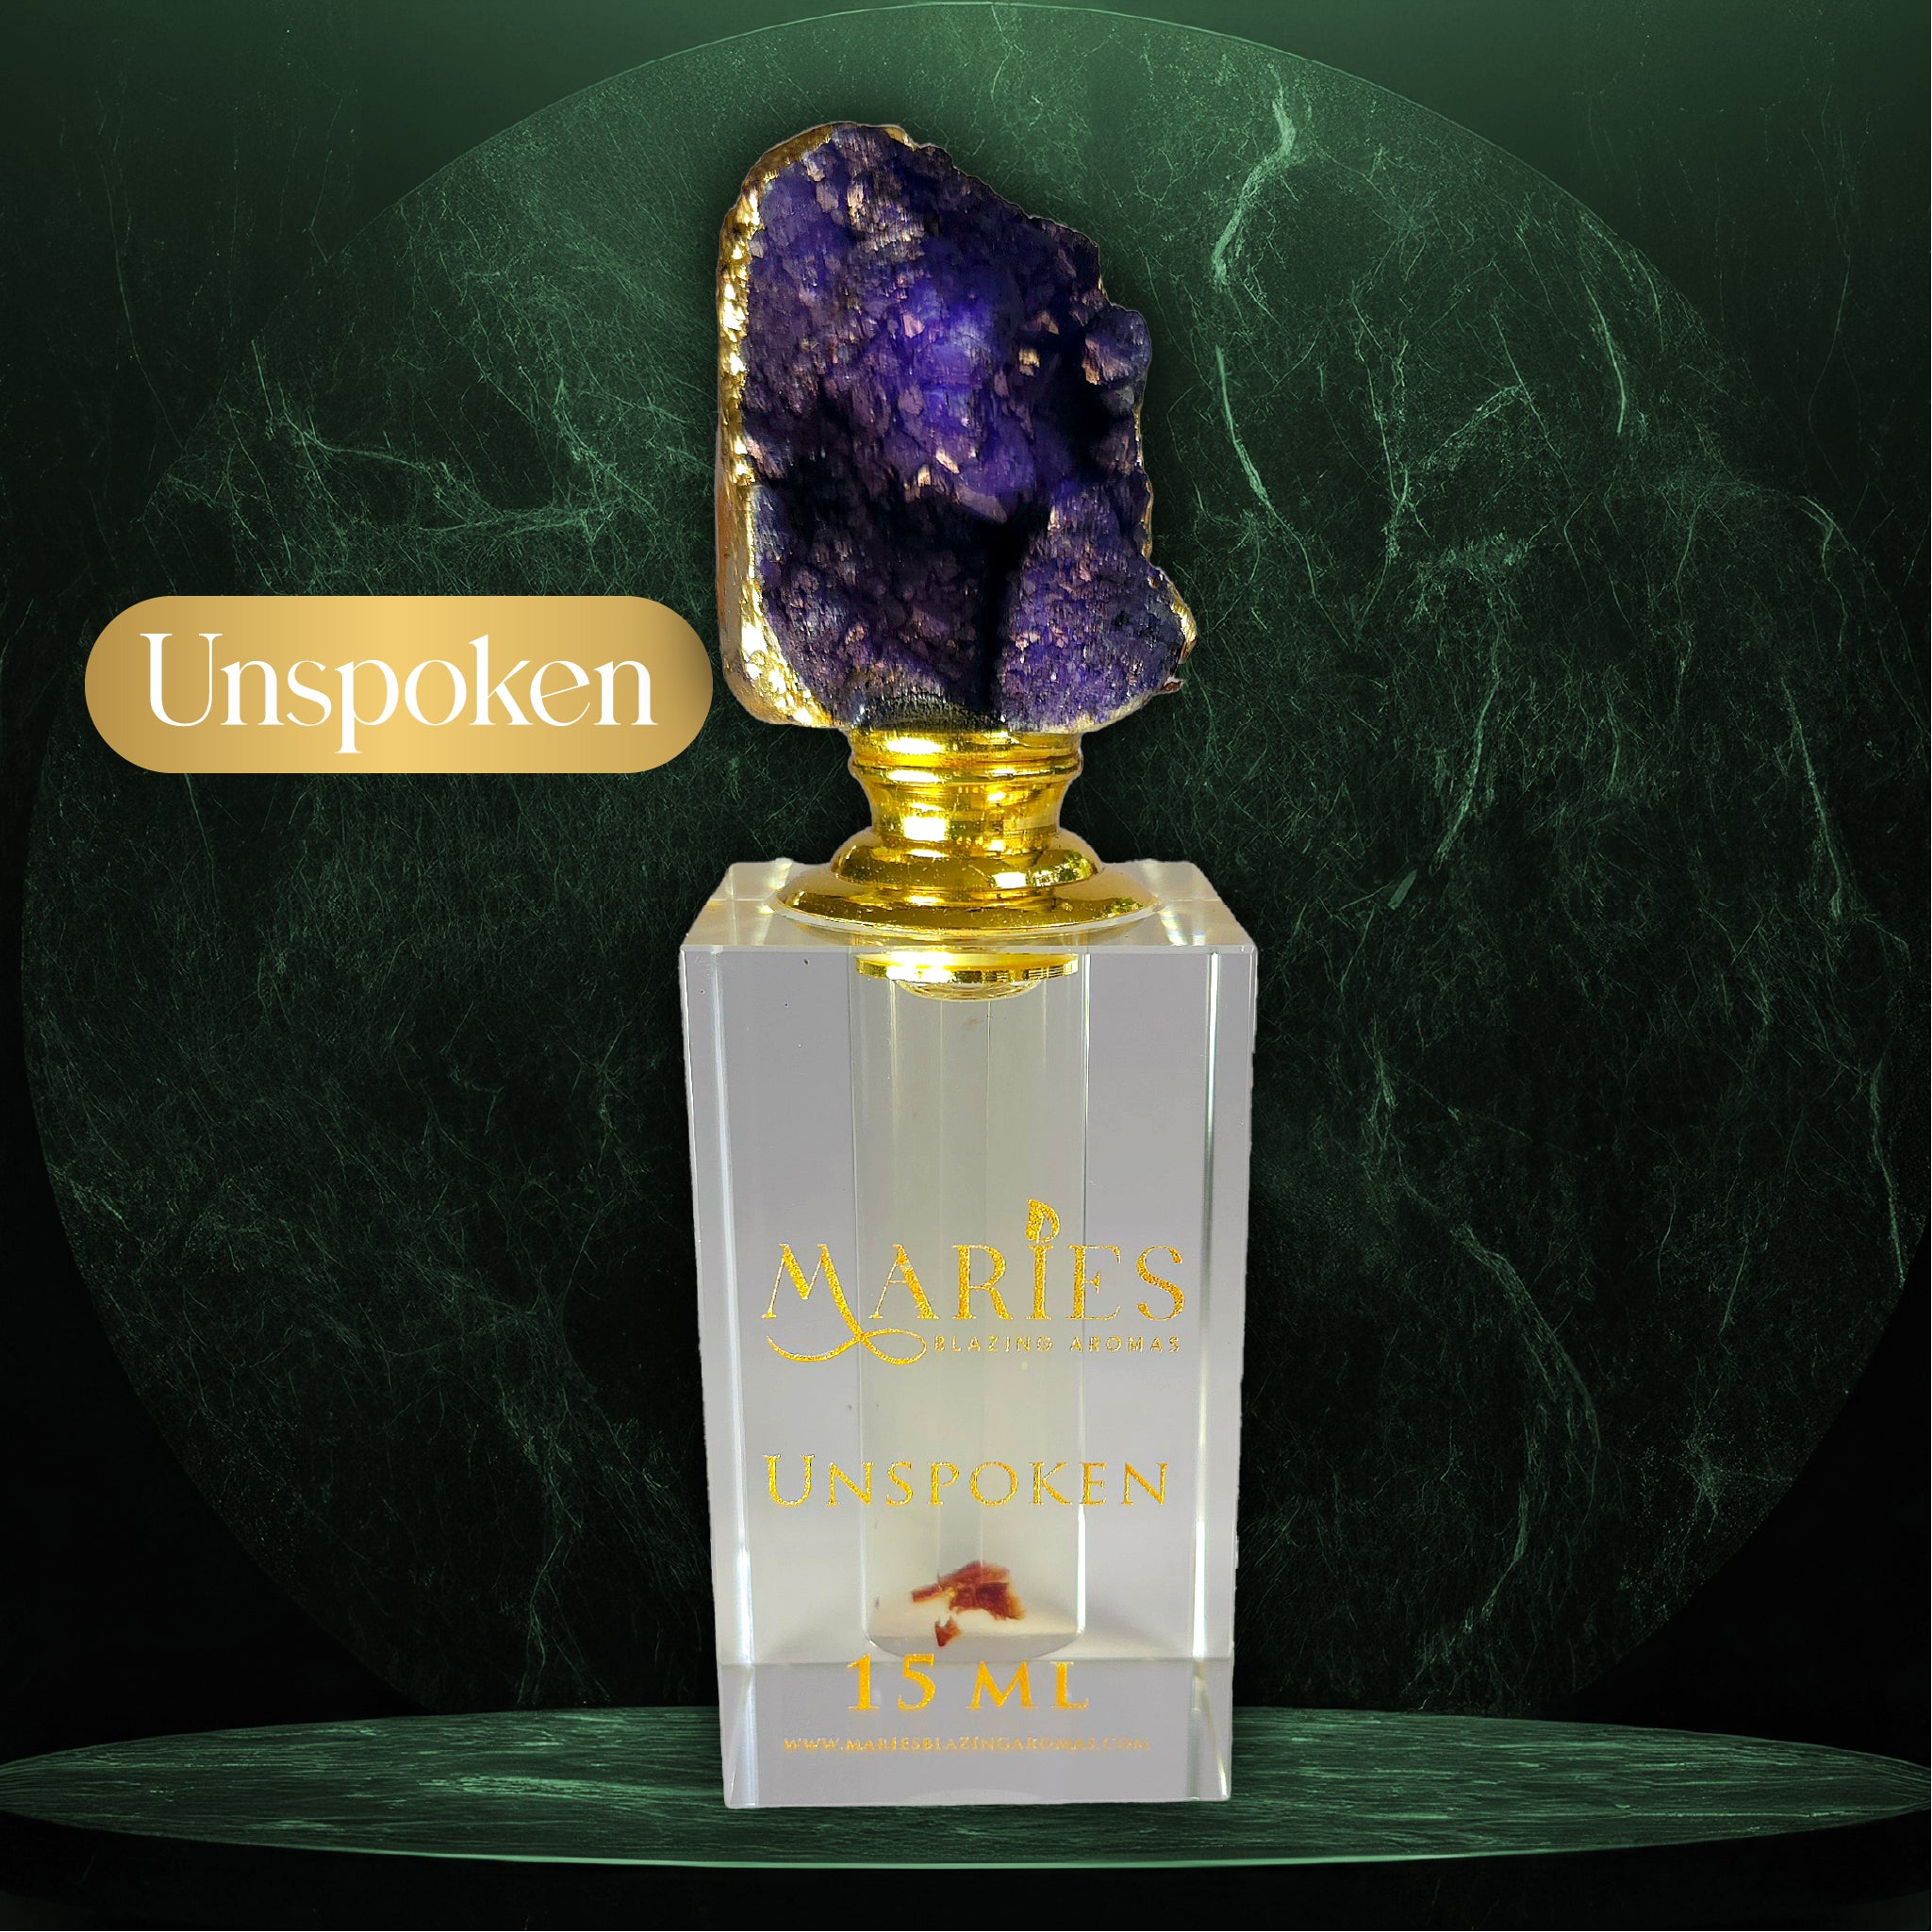 Luxurious Unspoken Perfume Fragrance Oil with sophisticated aromas - Maries Blazing Aroma